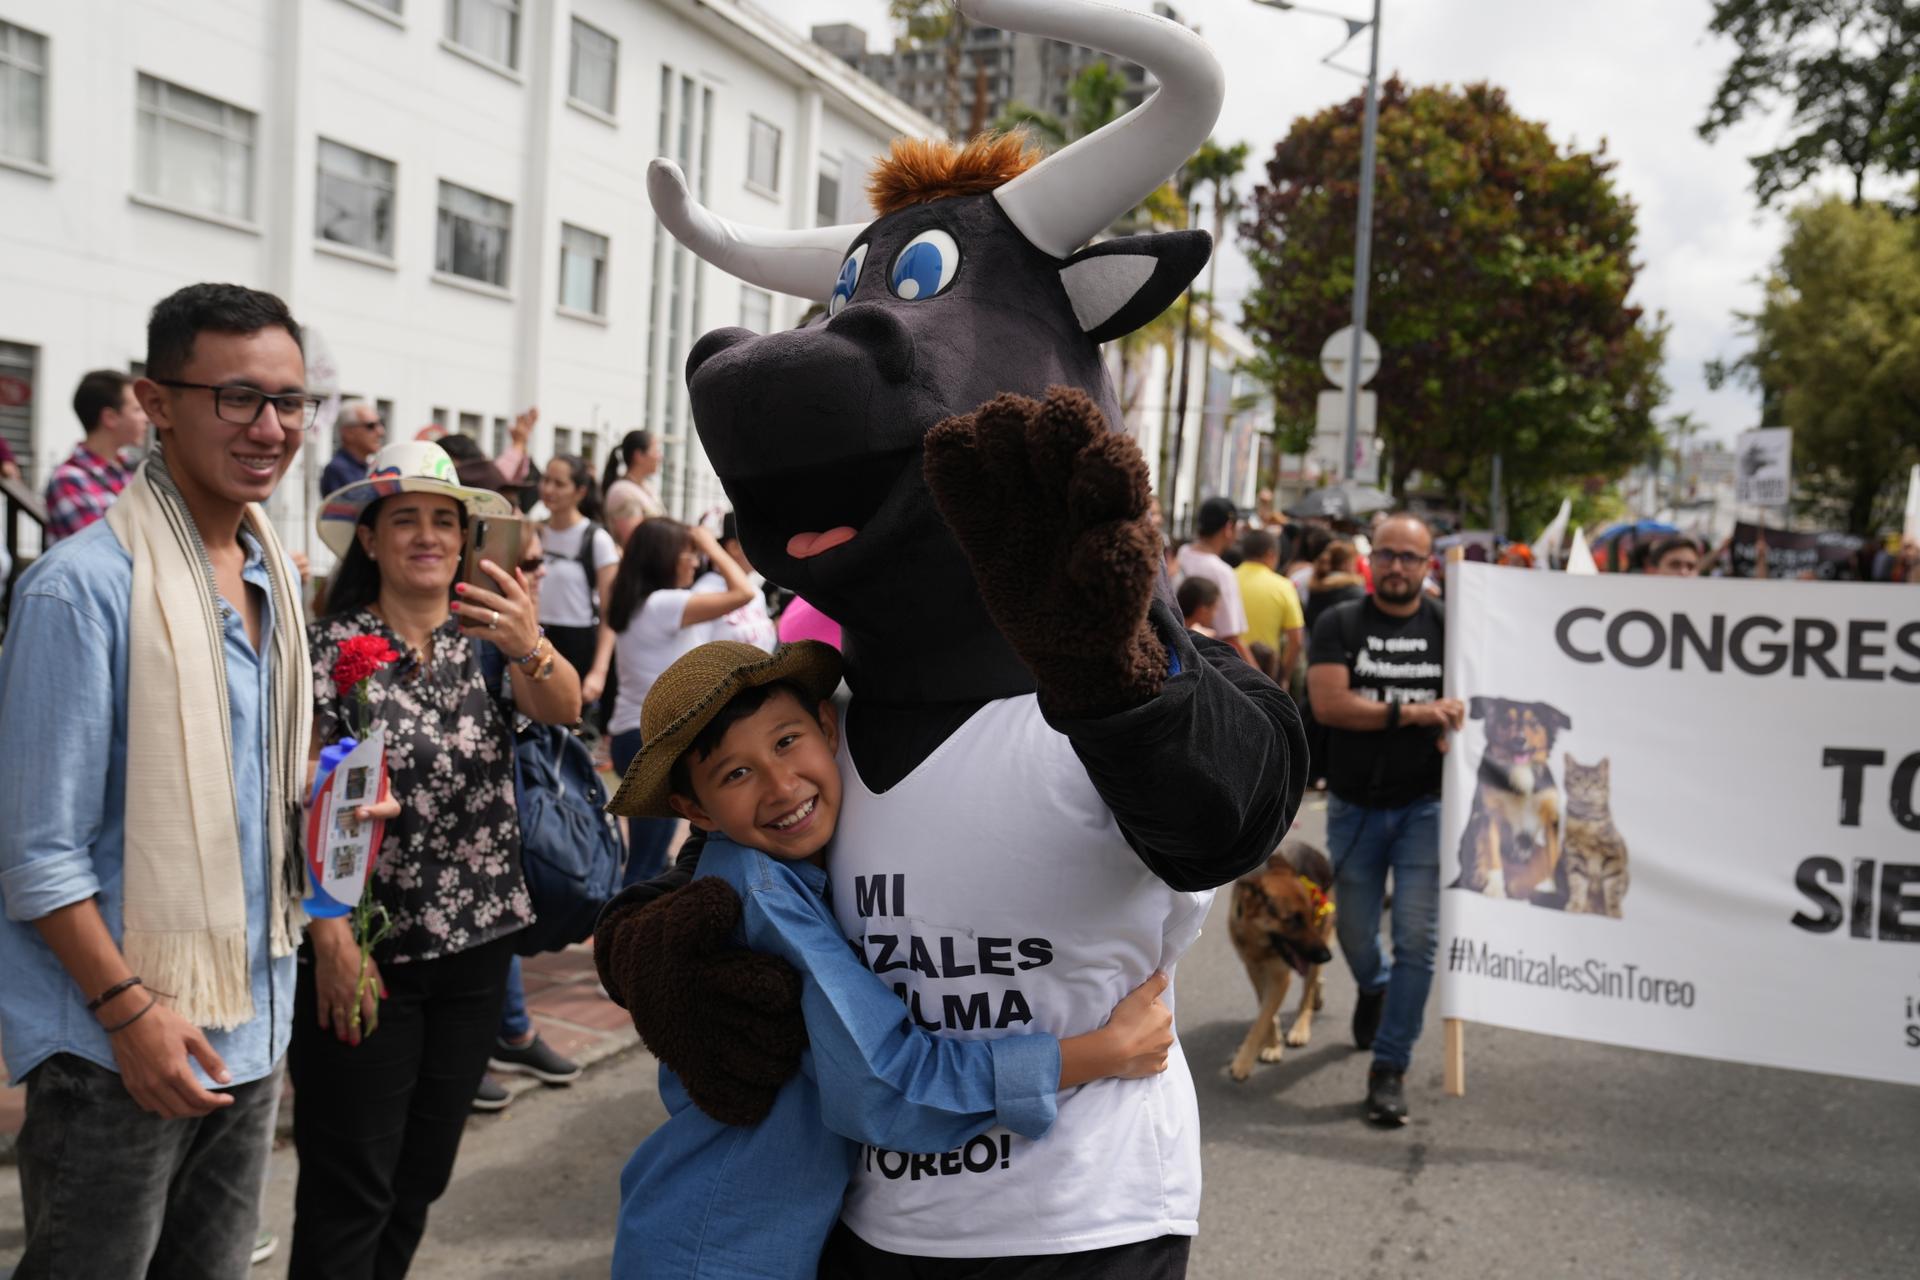 Some people watching the parade in Manizales heckled the animal rights activists. Others cheered for them and took photos with their mascot, a man dressed as a smiling bull. 